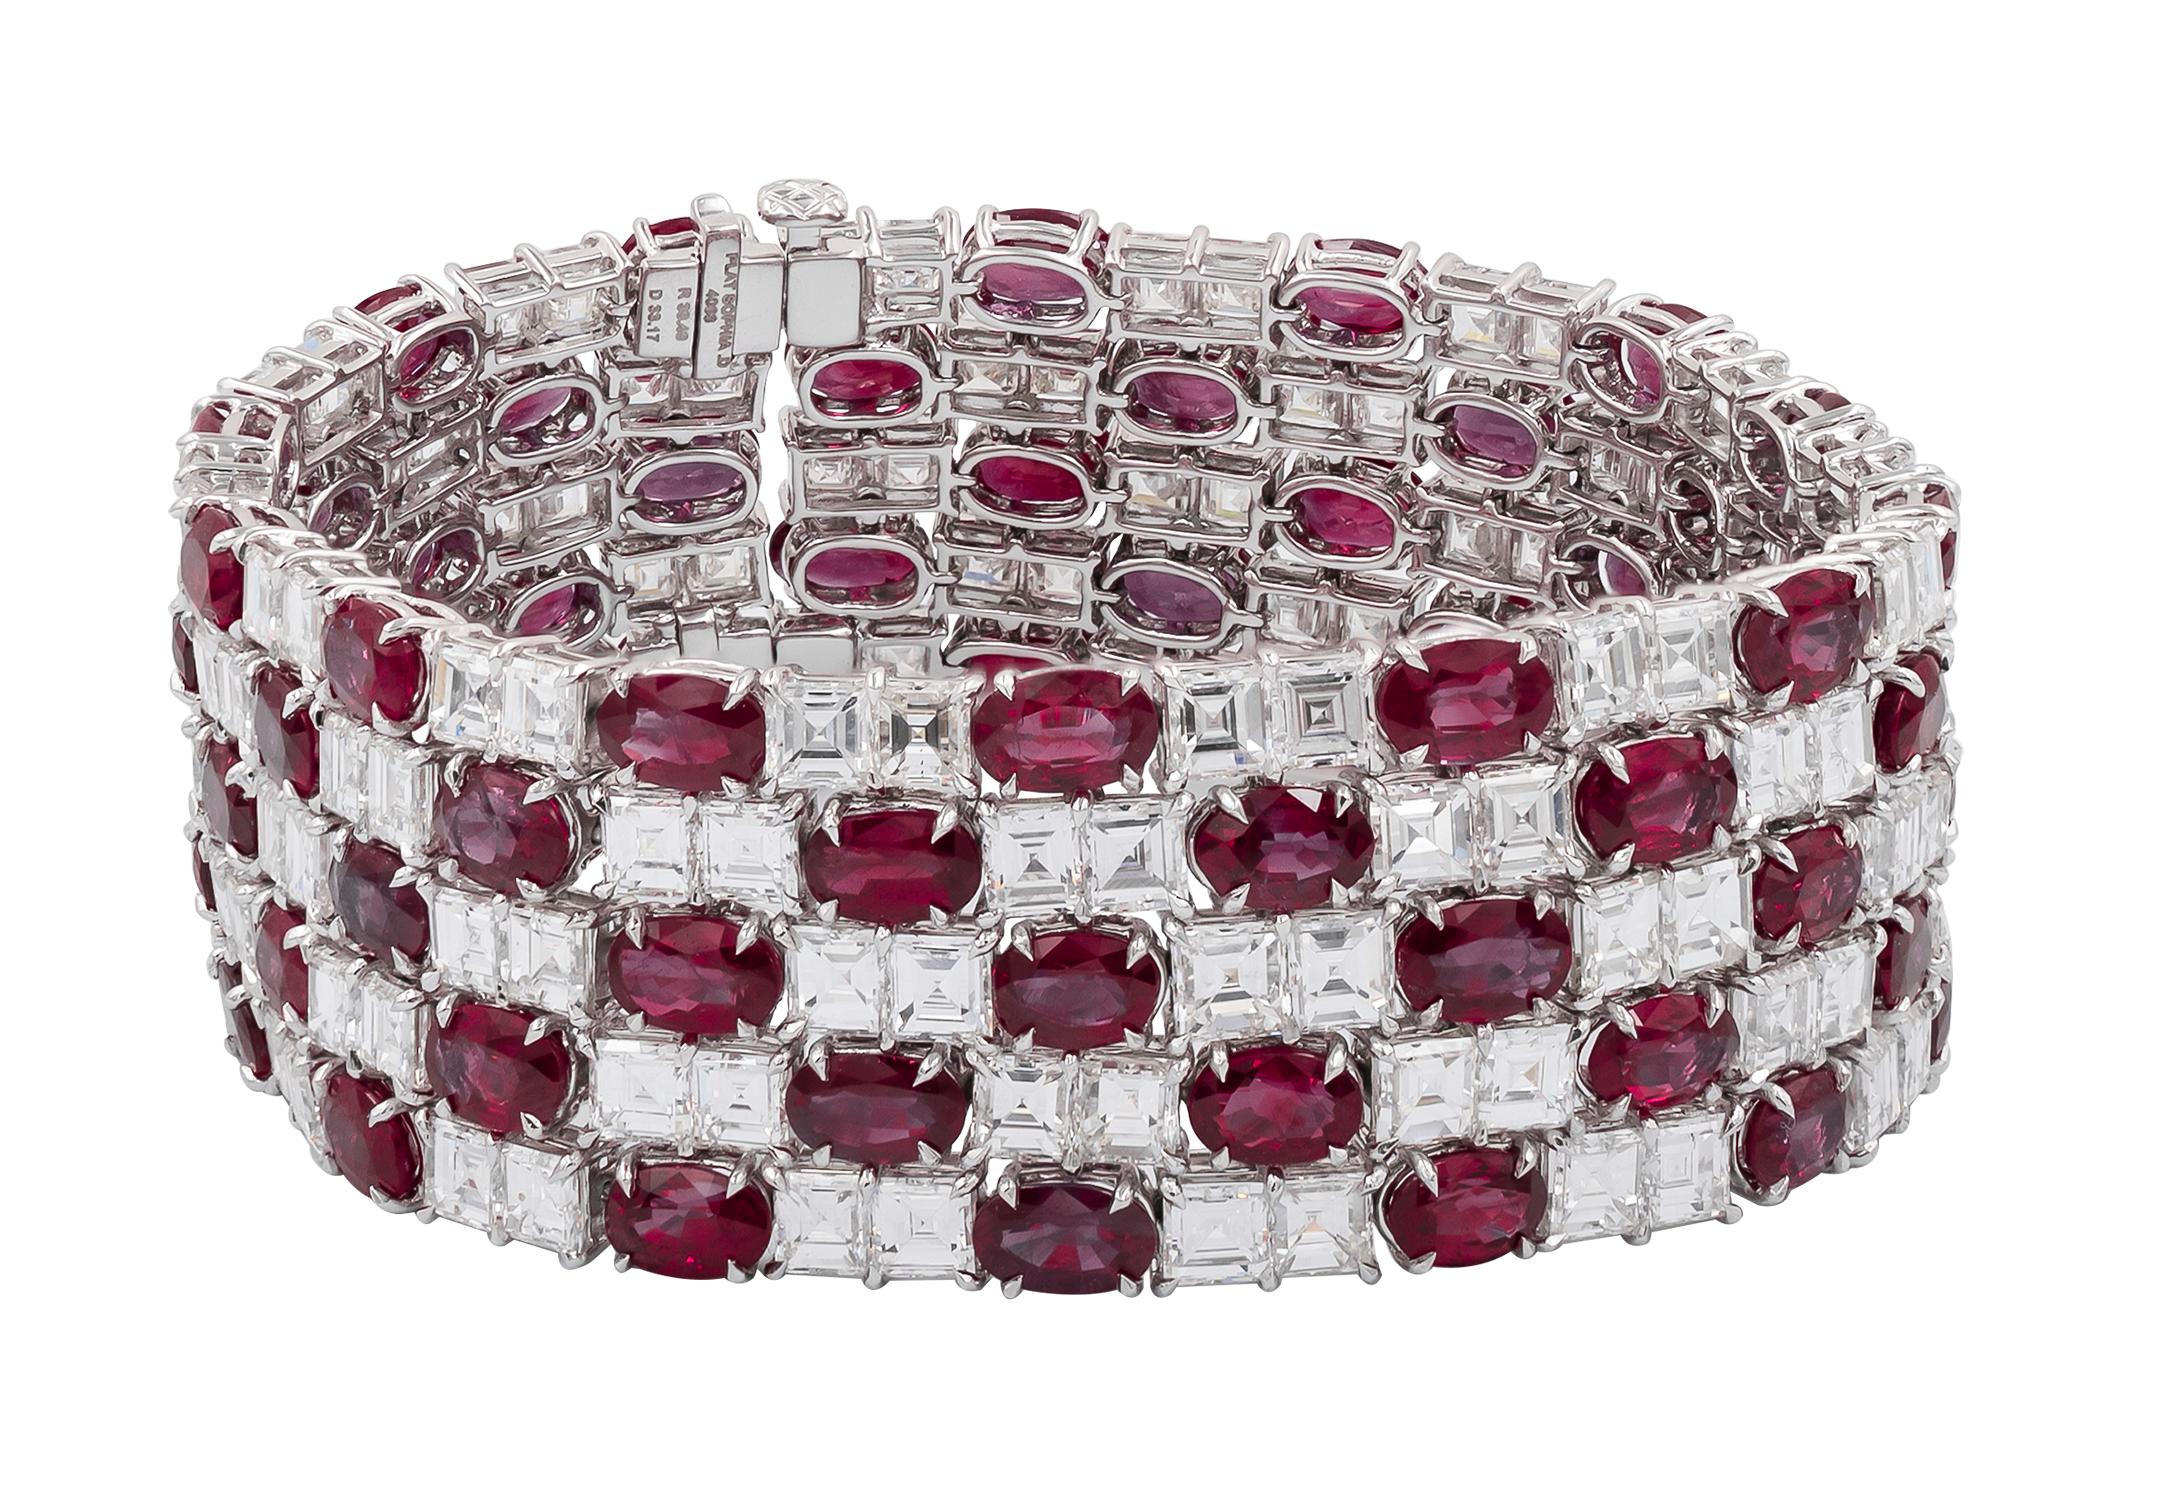 Sophia D. bracelet set in platinum that features a 39.49 carats of rubies and 33.17 carats of diamonds.

Sophia D by Joseph Dardashti LTD has been known worldwide for 35 years and are inspired by classic Art Deco design that merges with modern